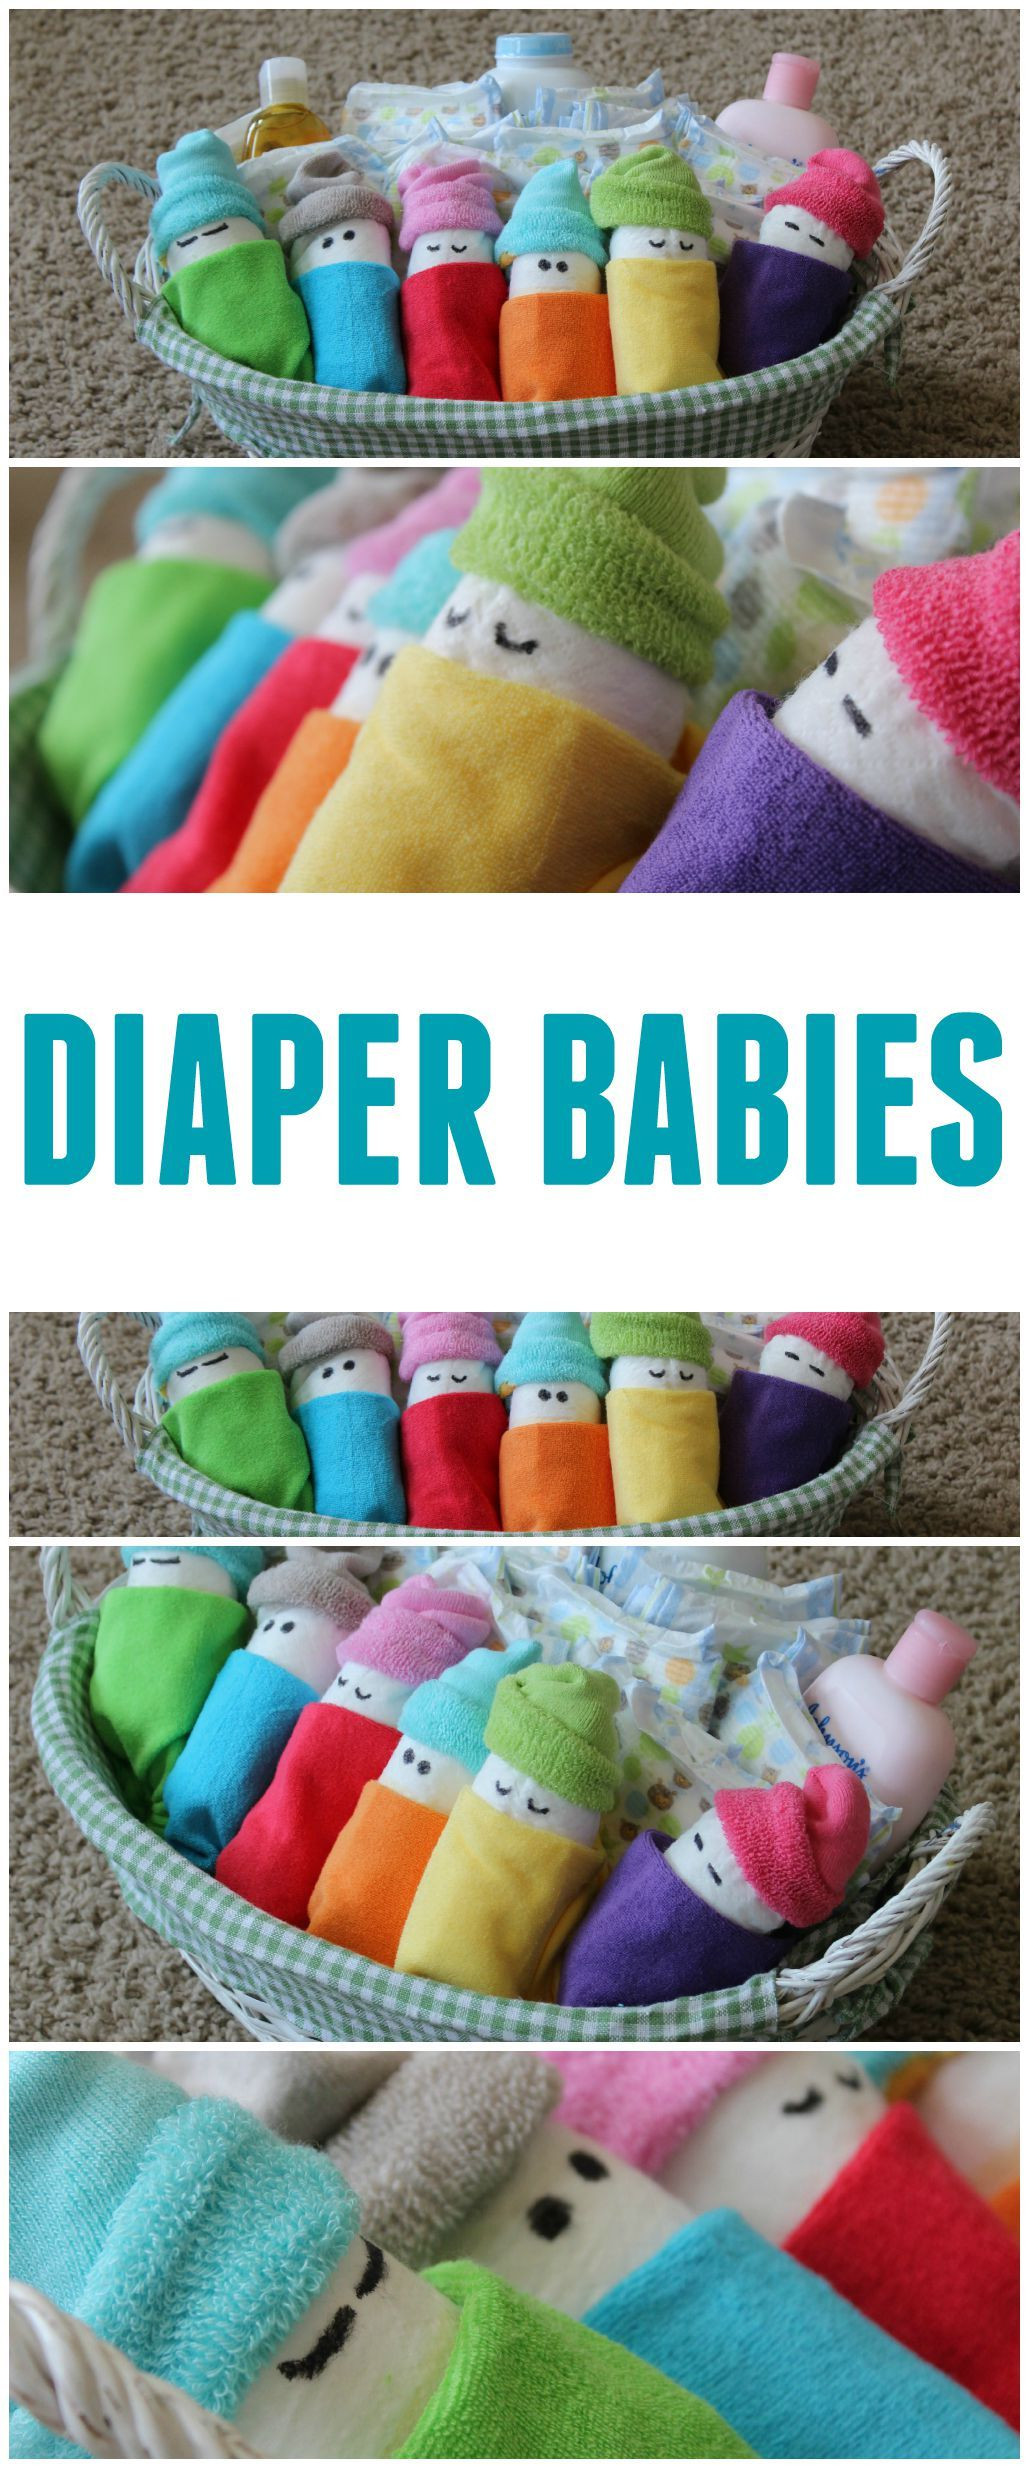 DIY Baby Shower Gifts Ideas
 How To Make Diaper Babies Easy Baby Shower Gift Idea